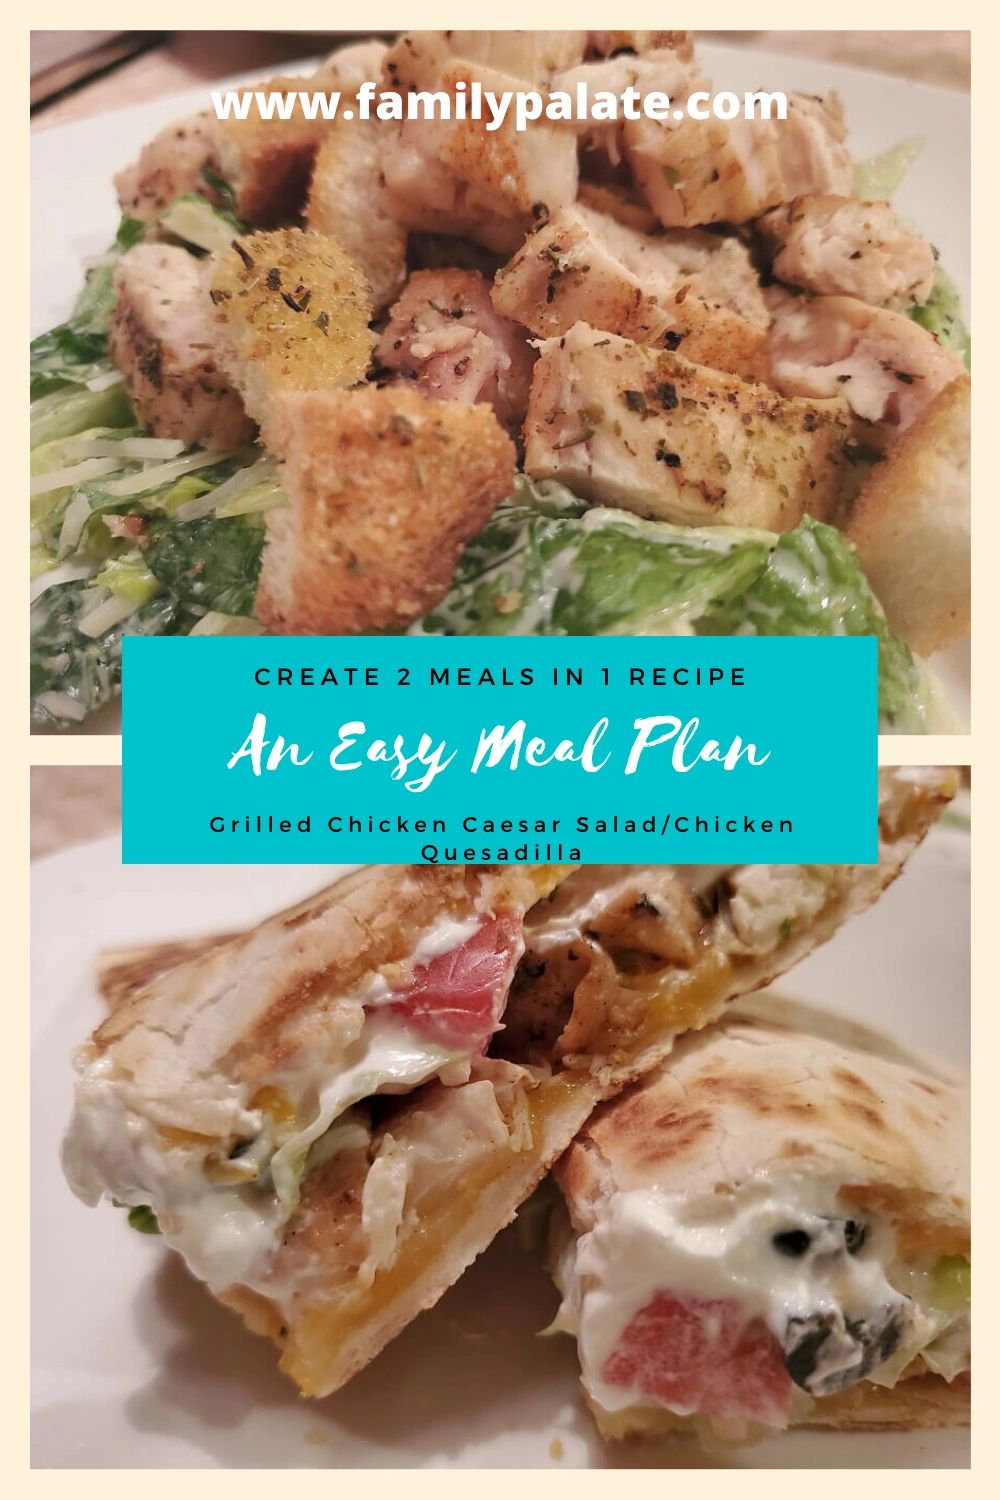 meal planning template, meal planning recipes, meal planning ideas, family meal plans, grilled chick